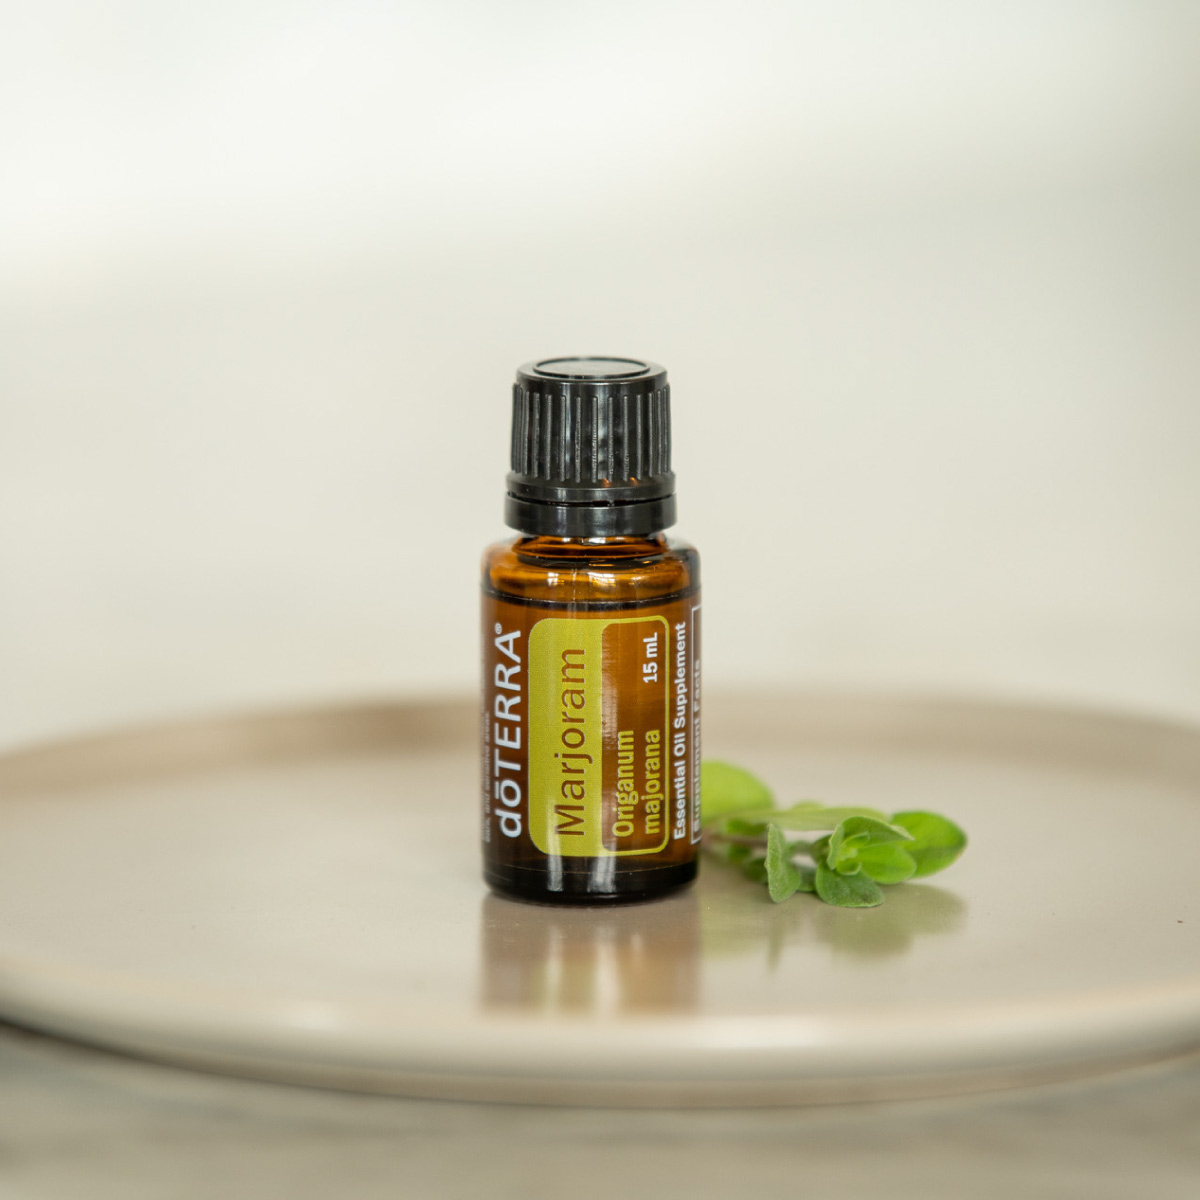 Bottle of Marjoram essential oil on a plate with fresh marjoram leaves, next to a fork and knife. How do I use marjoram essential oil? You can use Marjoram oil for cooking in place of dry marjoram. 